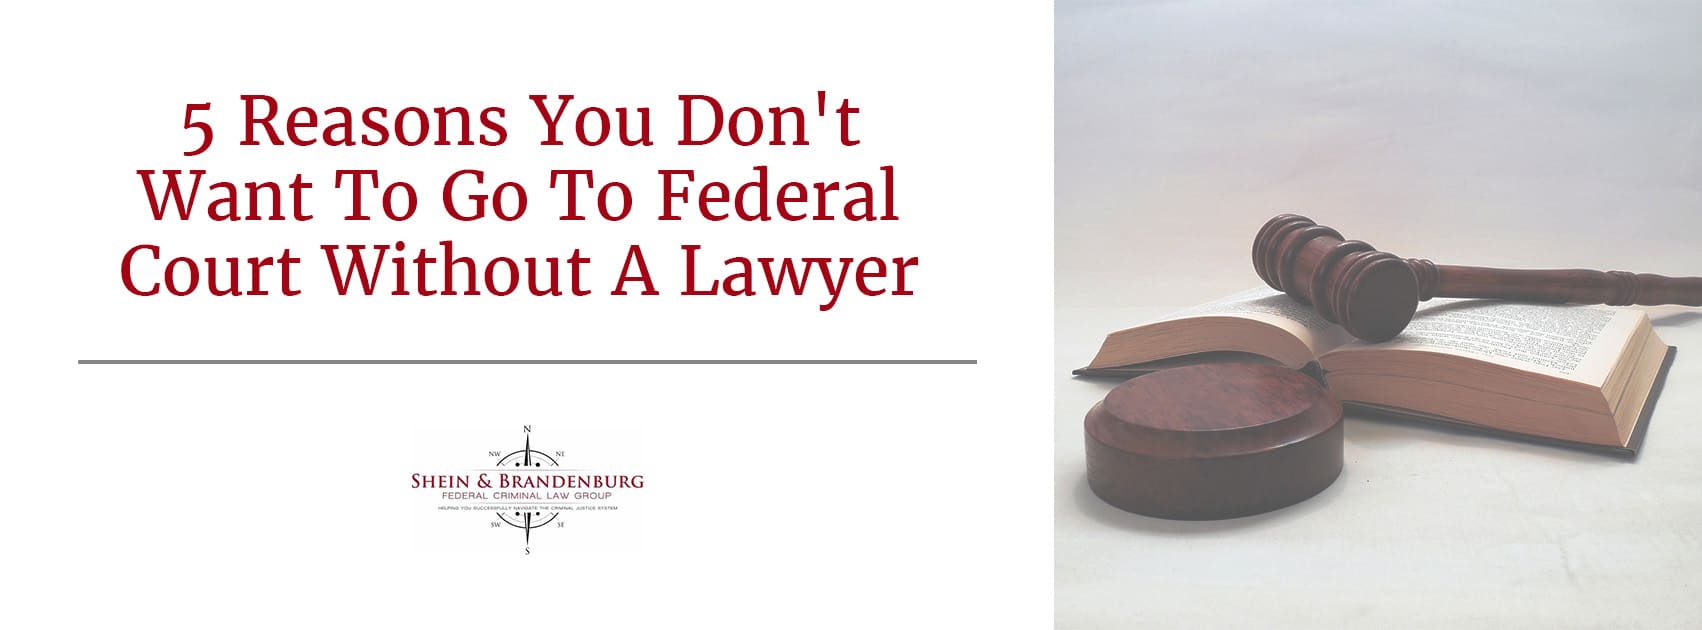 Five Reasons You do Not Want to Go to Federal Court Without a Lawyer